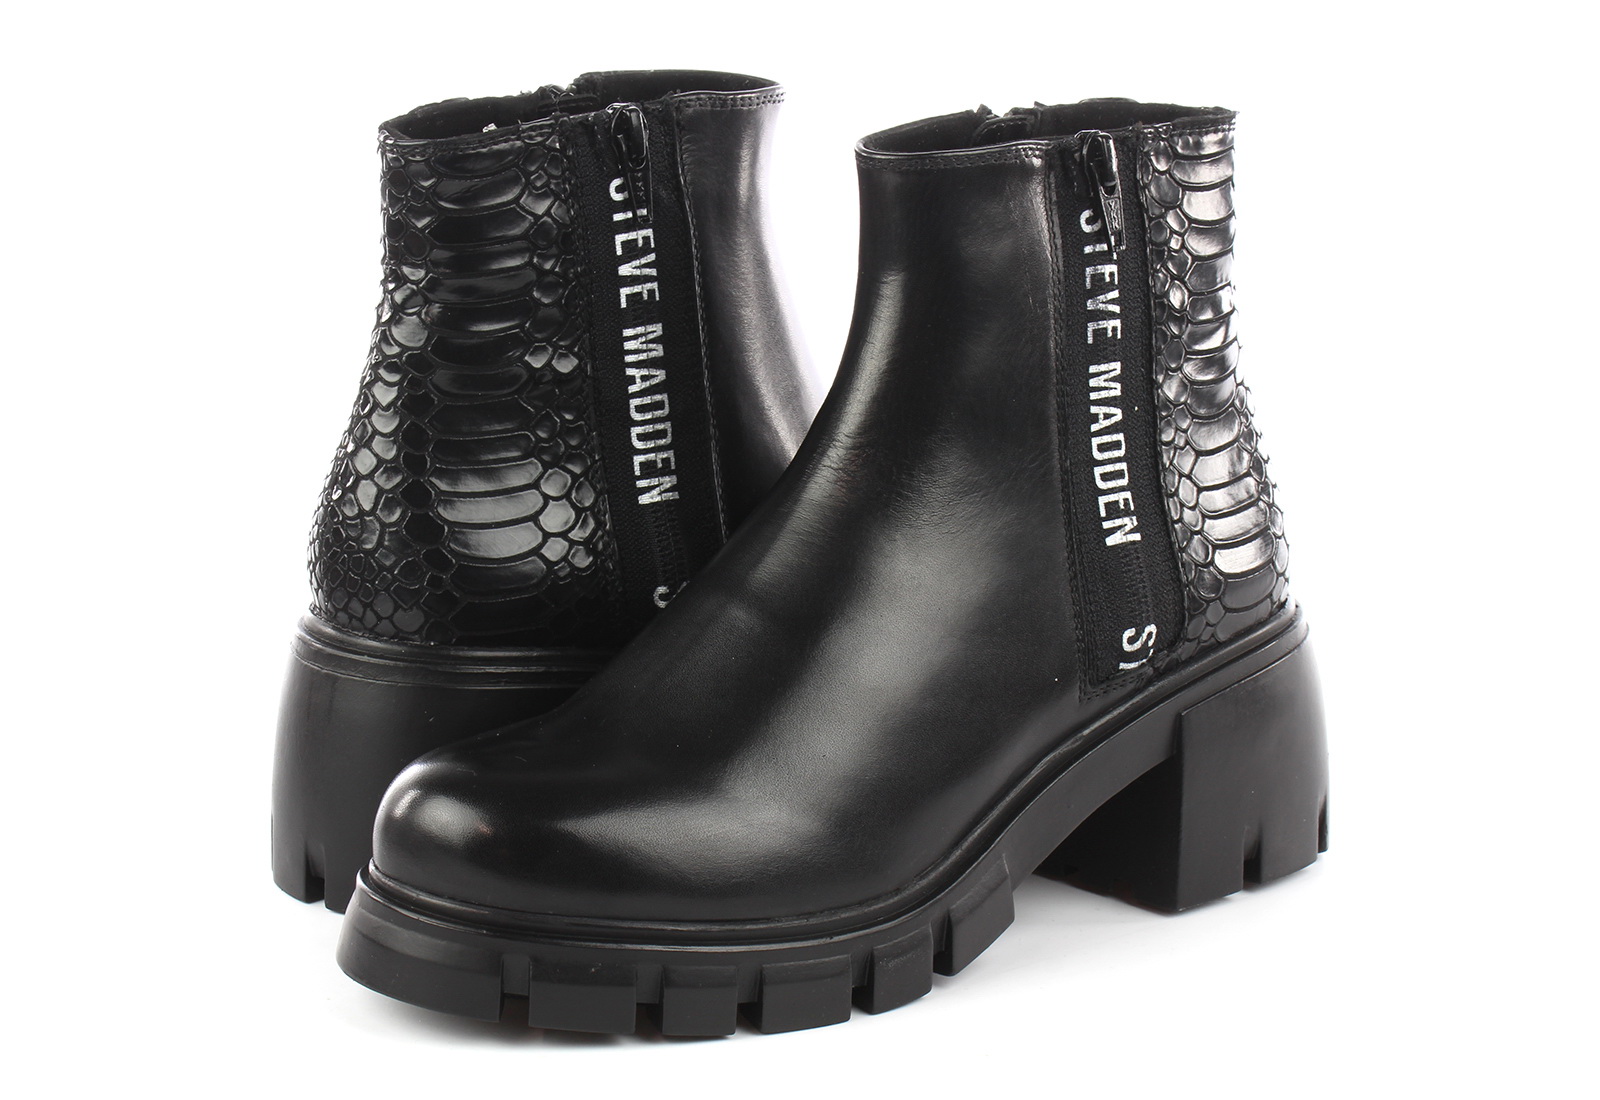 Steve Madden boots - Gross - S - - Online sneakers, shoes and boots